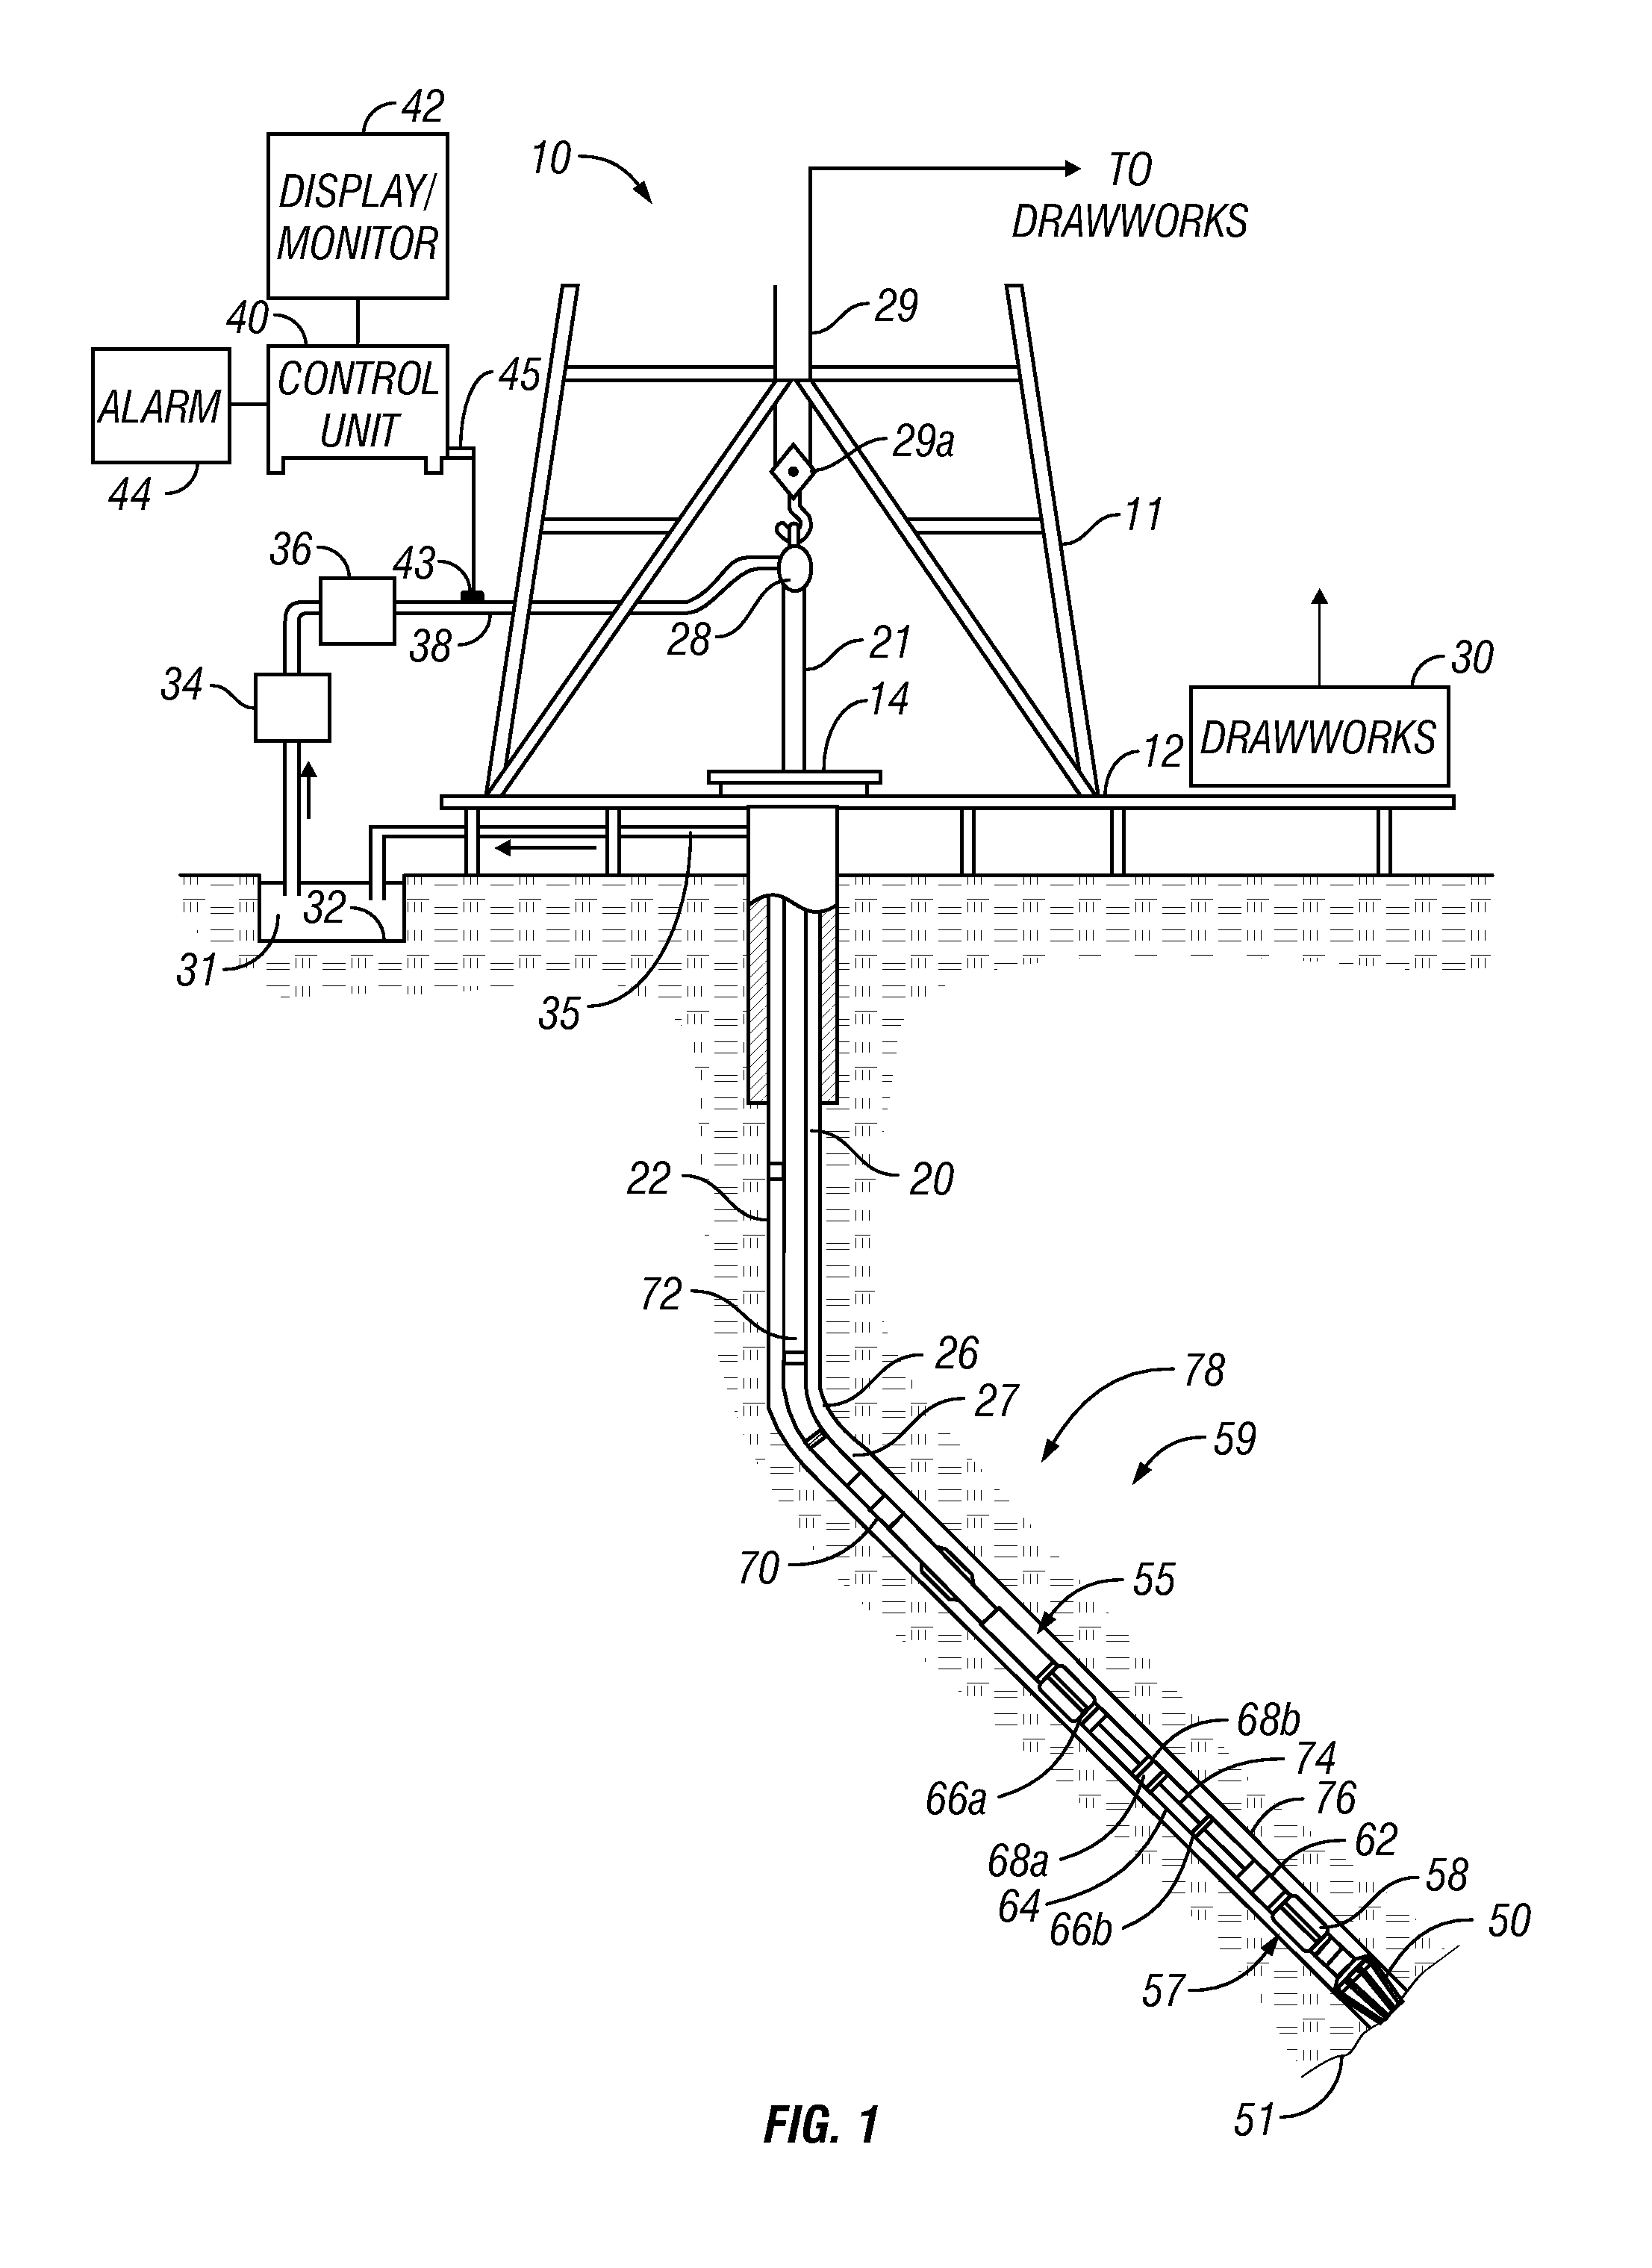 Method and Apparatus for Determining Formation Boundary Near the Bit for Conductive Mud